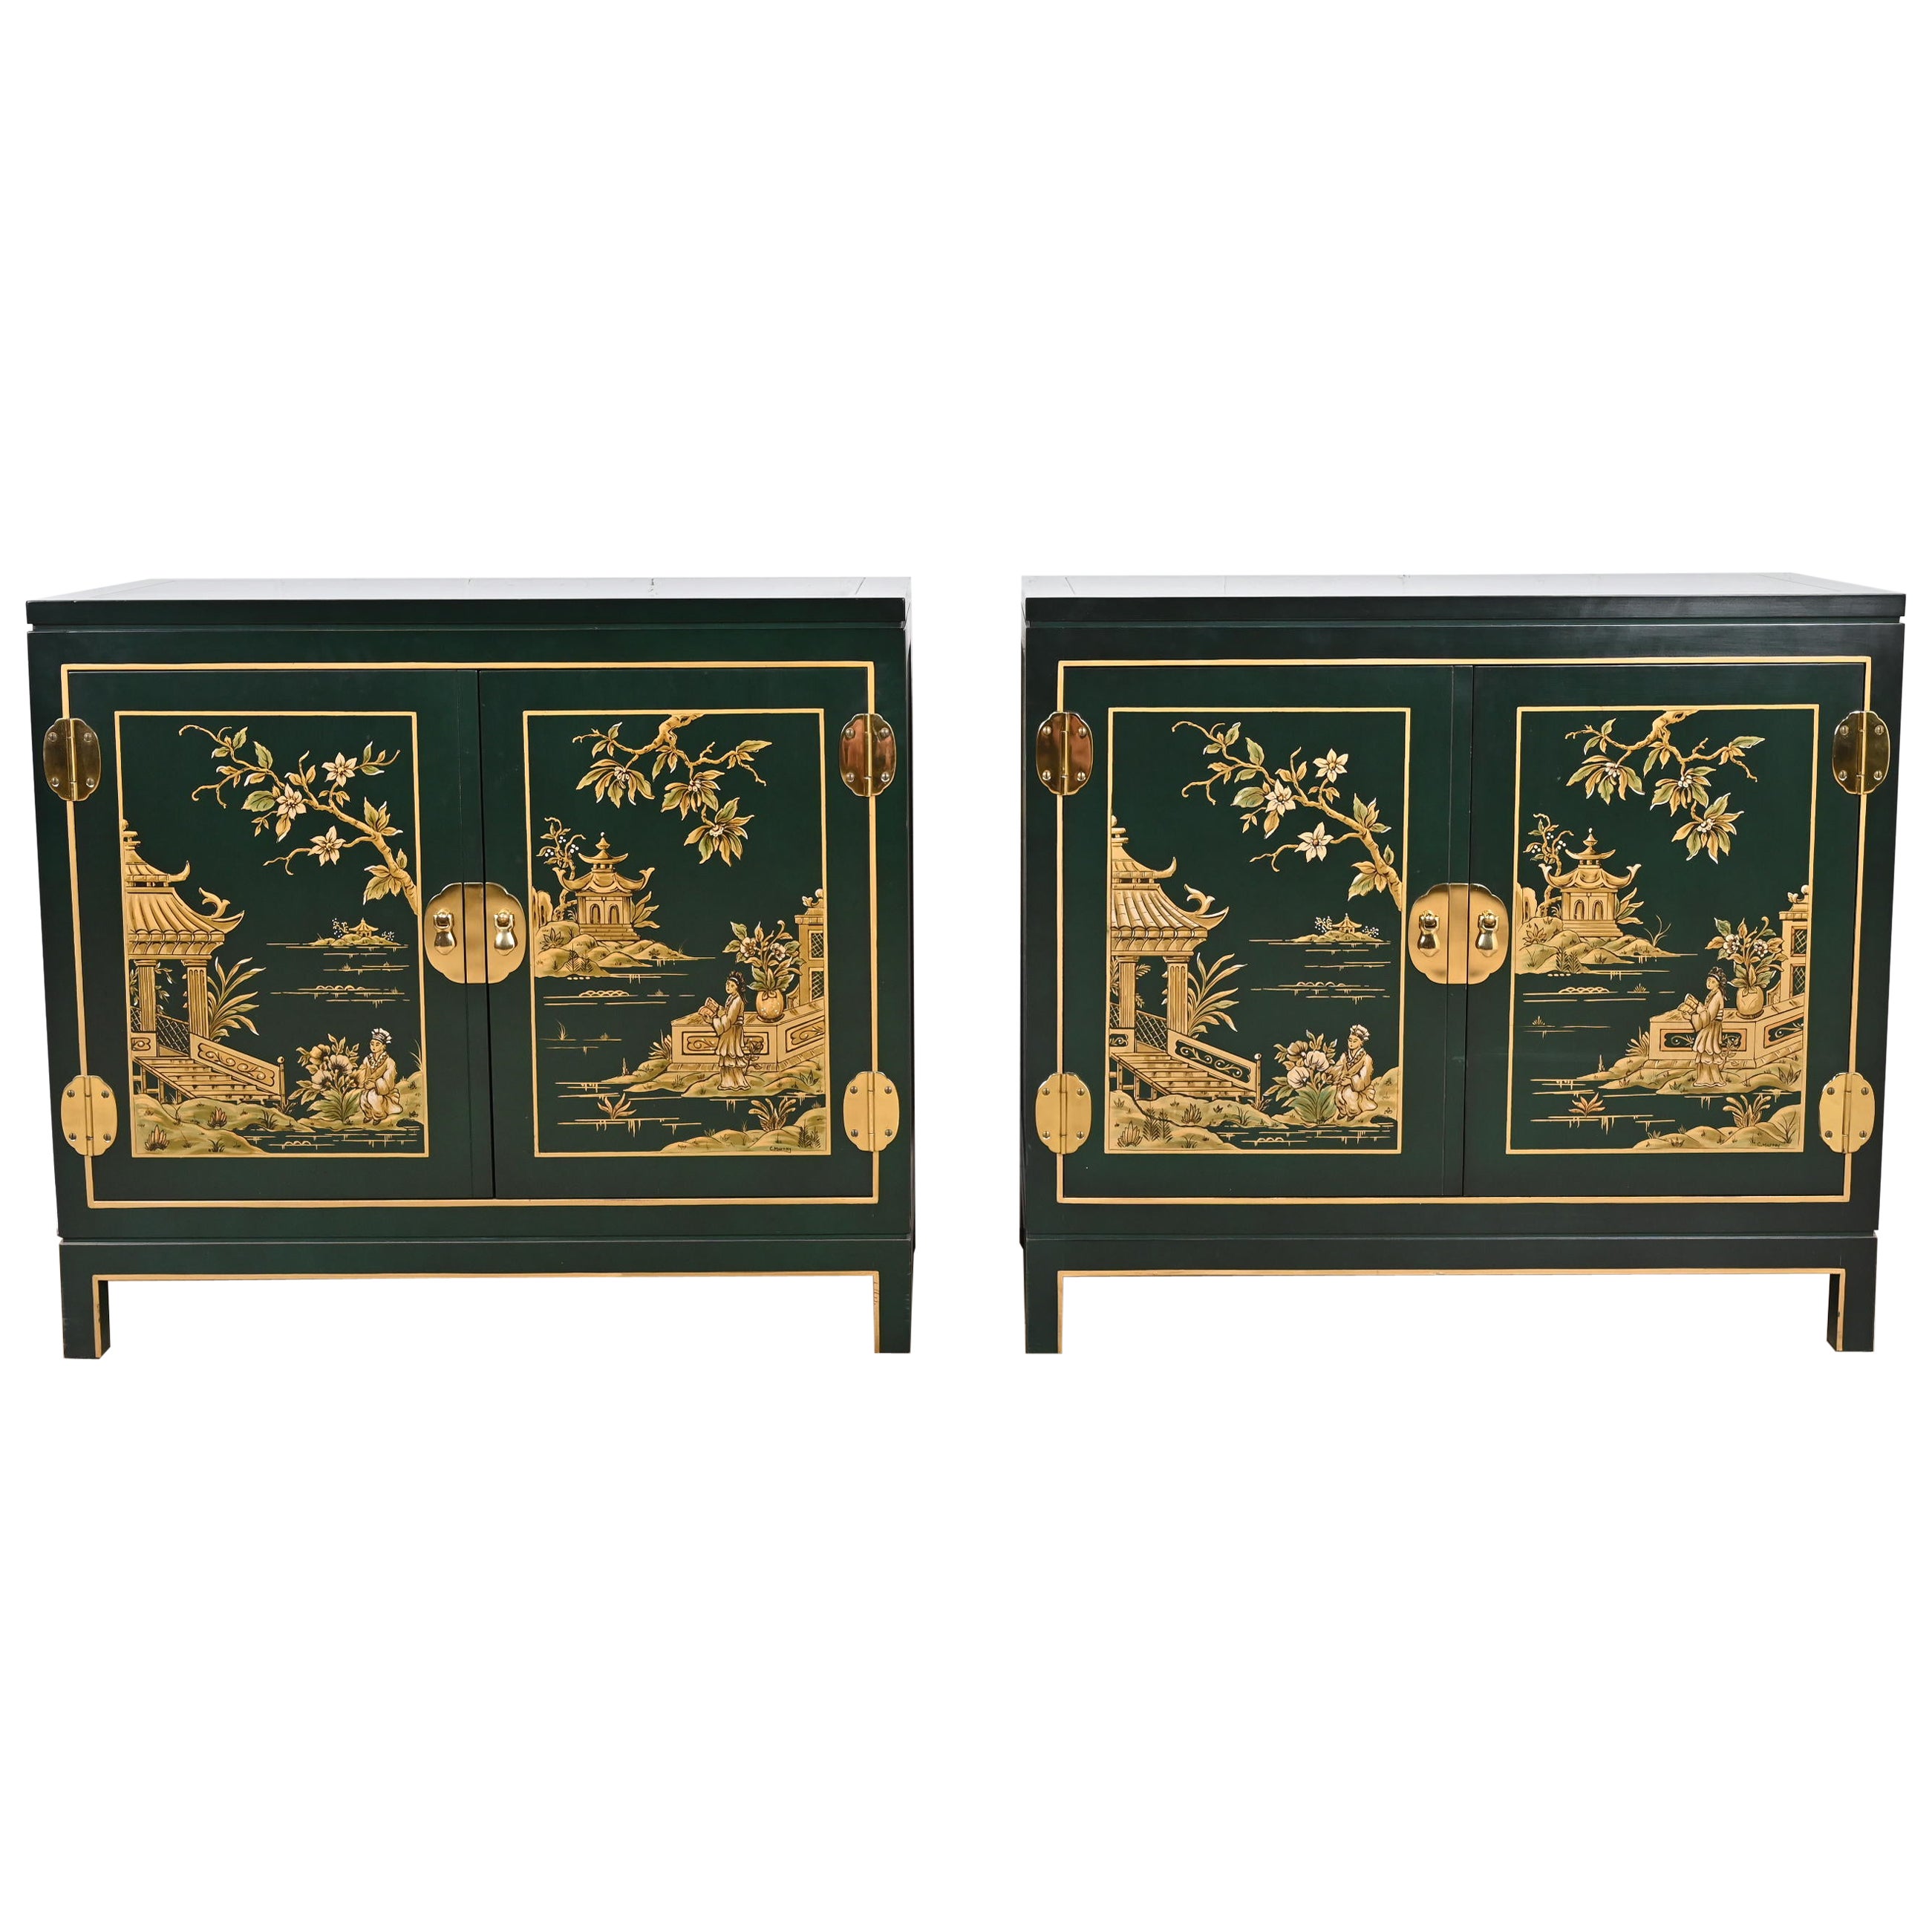 Kindel Furniture Chinoiserie Green Lacquered and Gold Gilt Hand Painted Cabinets